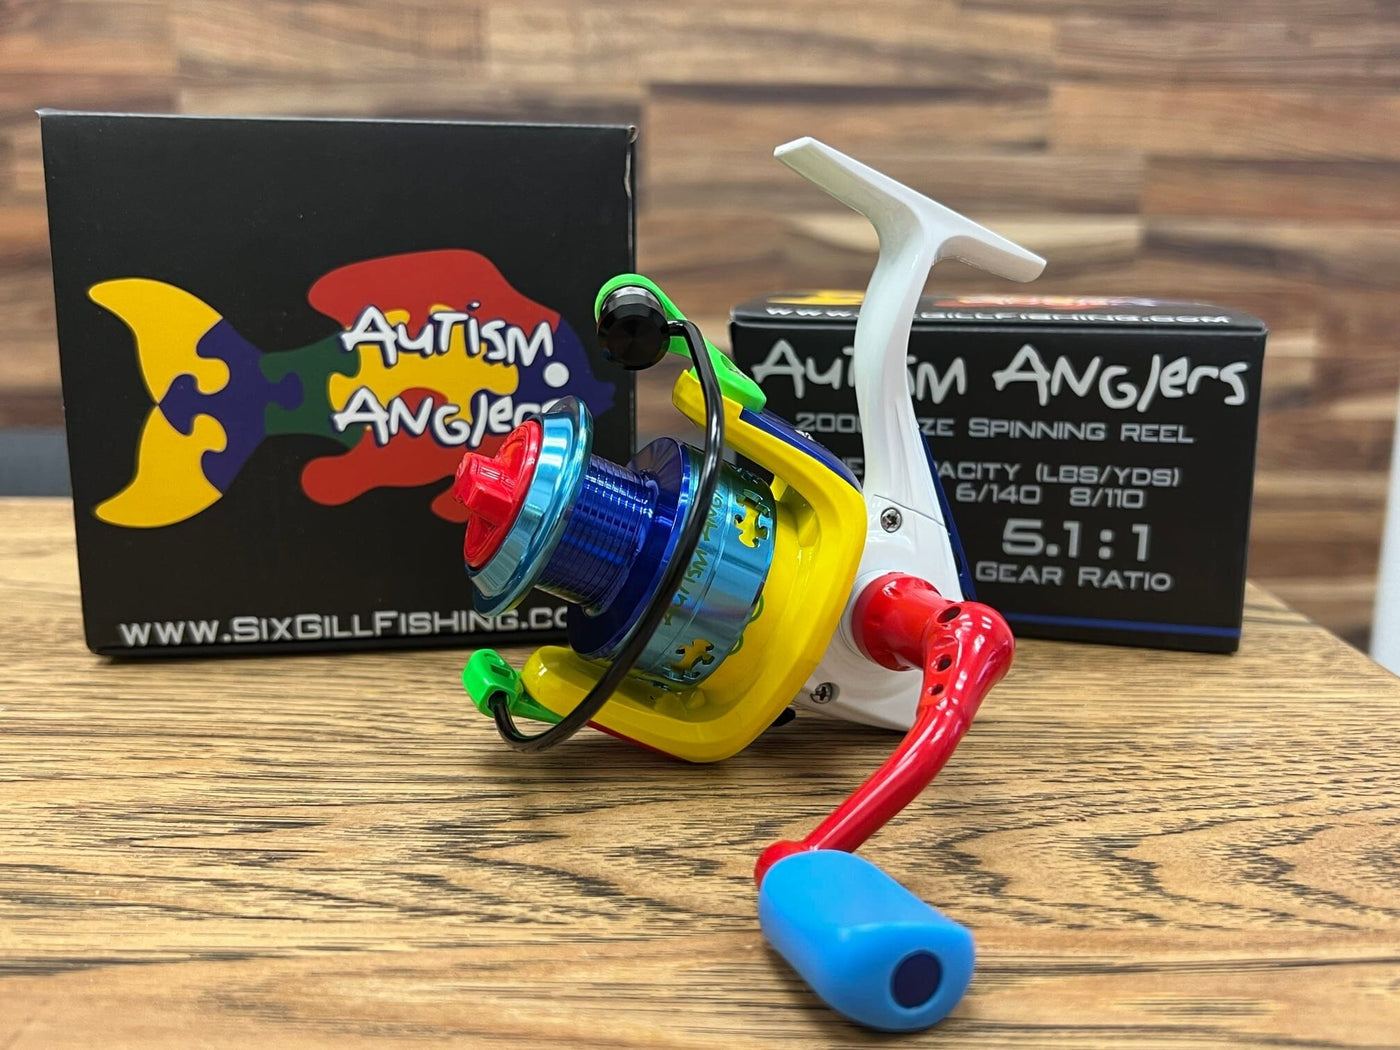 Autism awareness bait caster, Shoutout to Sixgill Fishing Products Autism  Anglers 🧩🧩🧩🎣🎣🎣🎯🎯